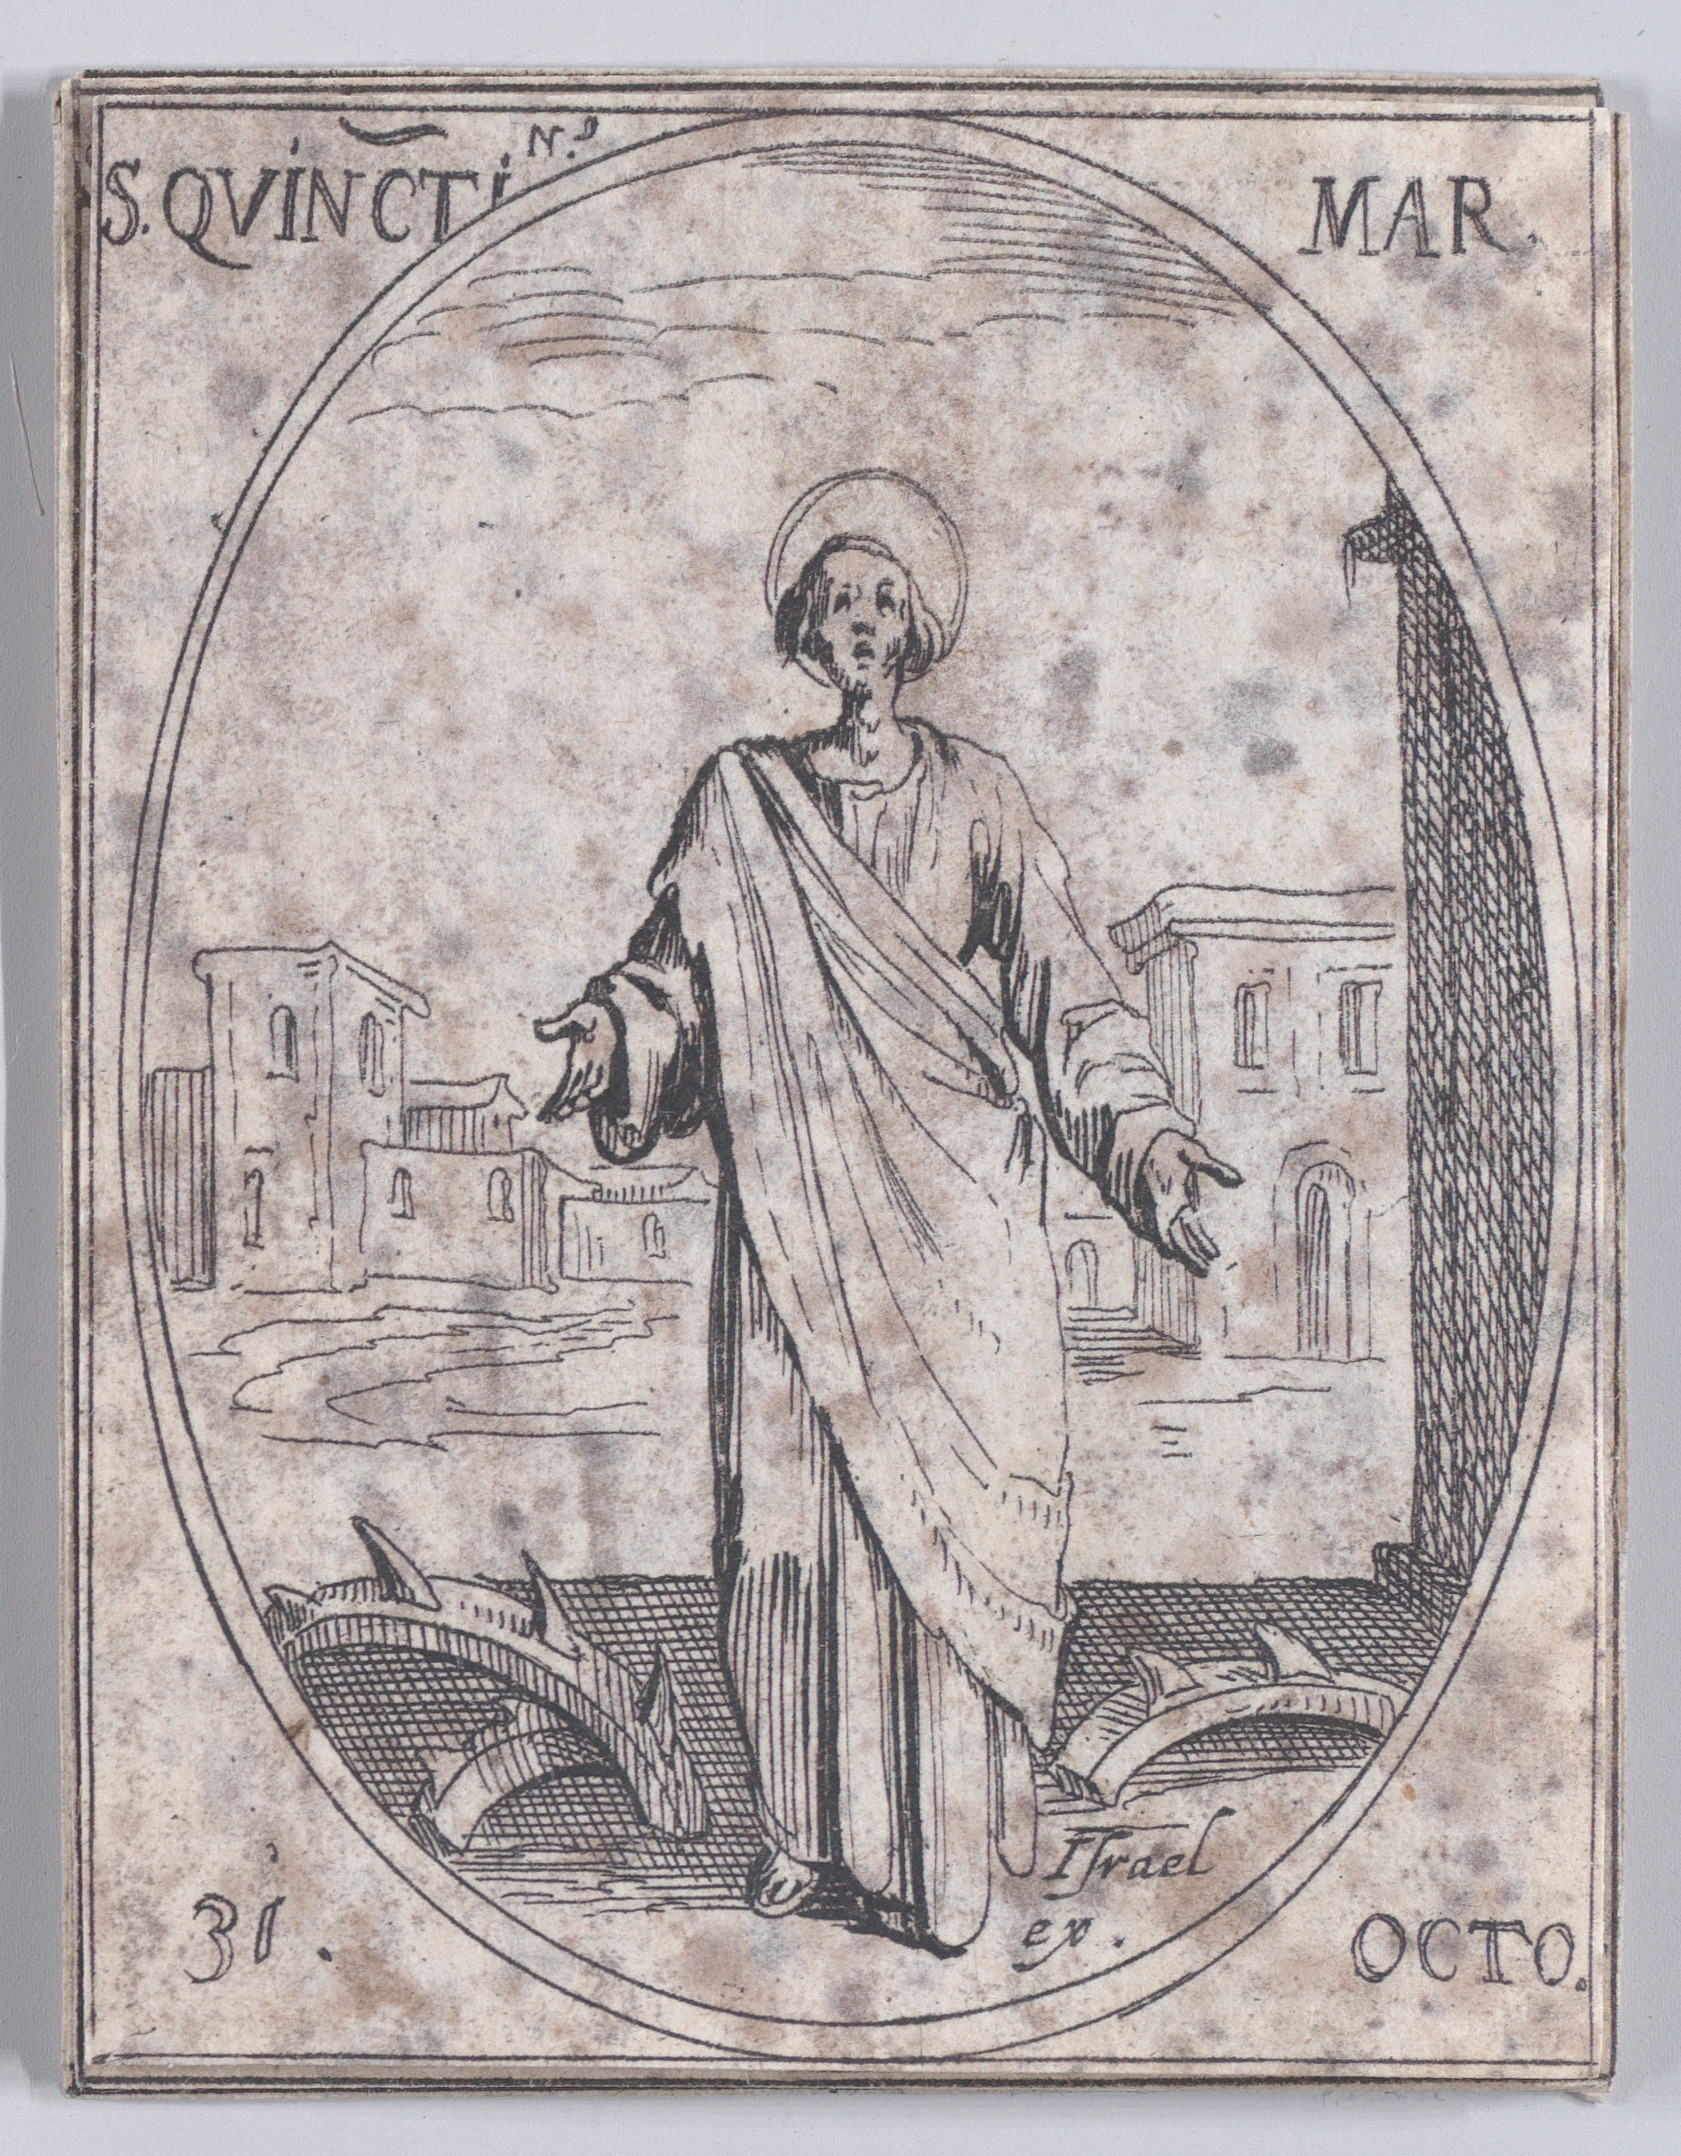 S. Quentin, martyr (St. Quintinus, Martyr), October 31st, from Les Images De Tous Les Saincts et Saintes de L'Année (Images of All of the Saints and Religious Events of the Year), Jacques Callot (French, Nancy 1592–1635 Nancy), Etching; second state of two (Lieure)